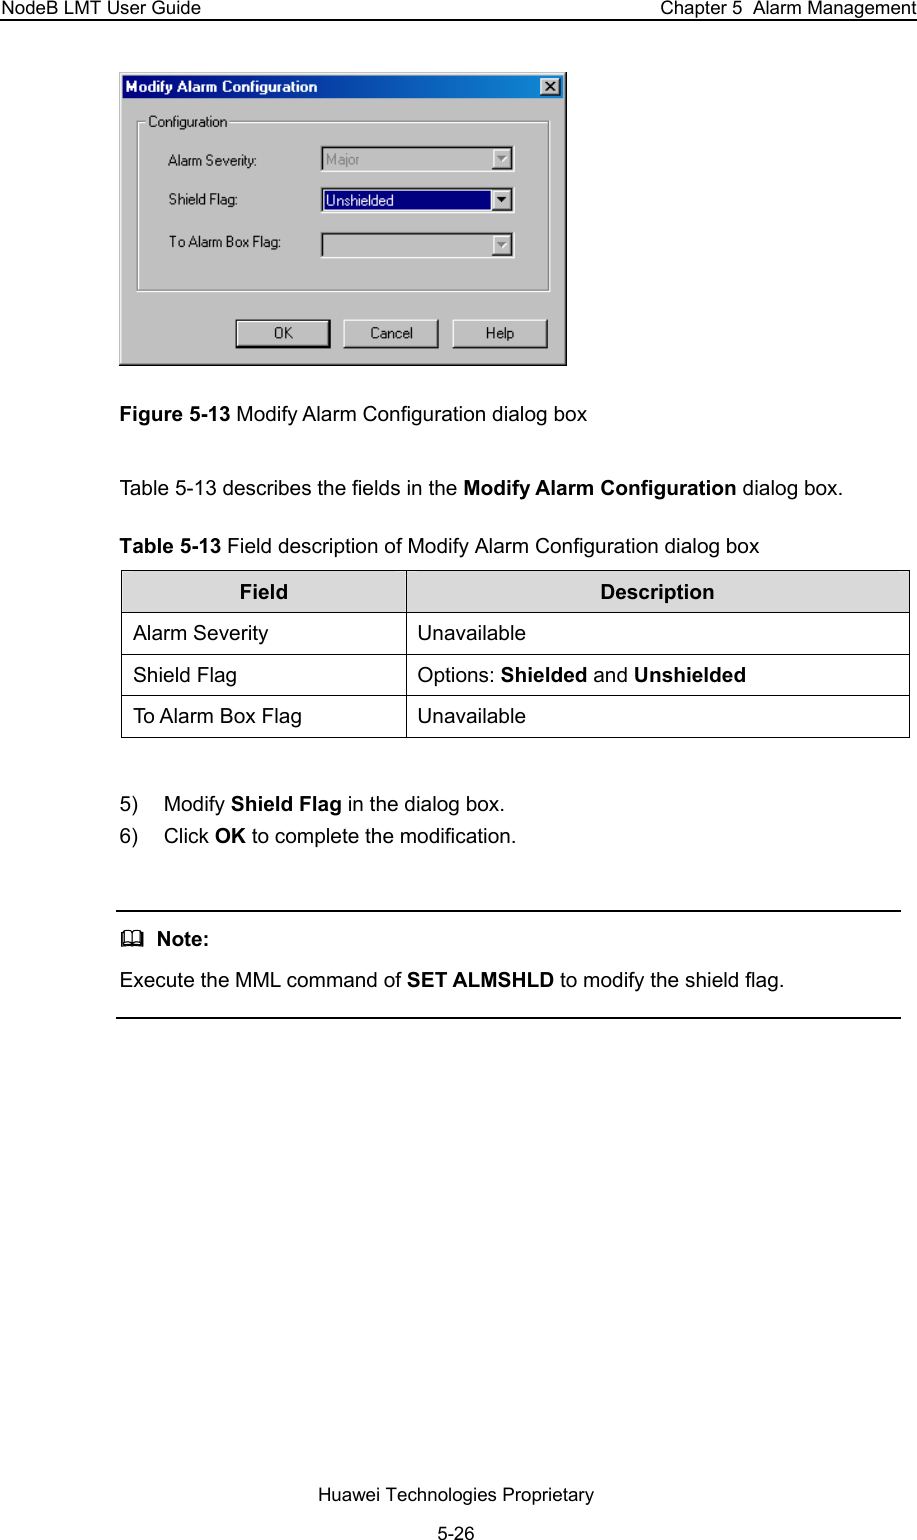 NodeB LMT User Guide  Chapter 5  Alarm Management  Figure 5-13 Modify Alarm Configuration dialog box Table 5-13 describes the fields in the Modify Alarm Configuration dialog box.  Table 5-13 Field description of Modify Alarm Configuration dialog box Field   Description  Alarm Severity   Unavailable   Shield Flag   Options: Shielded and Unshielded  To Alarm Box Flag   Unavailable    5) Modify Shield Flag in the dialog box.  6) Click OK to complete the modification.     Note:  Execute the MML command of SET ALMSHLD to modify the shield flag.   Huawei Technologies Proprietary 5-26 